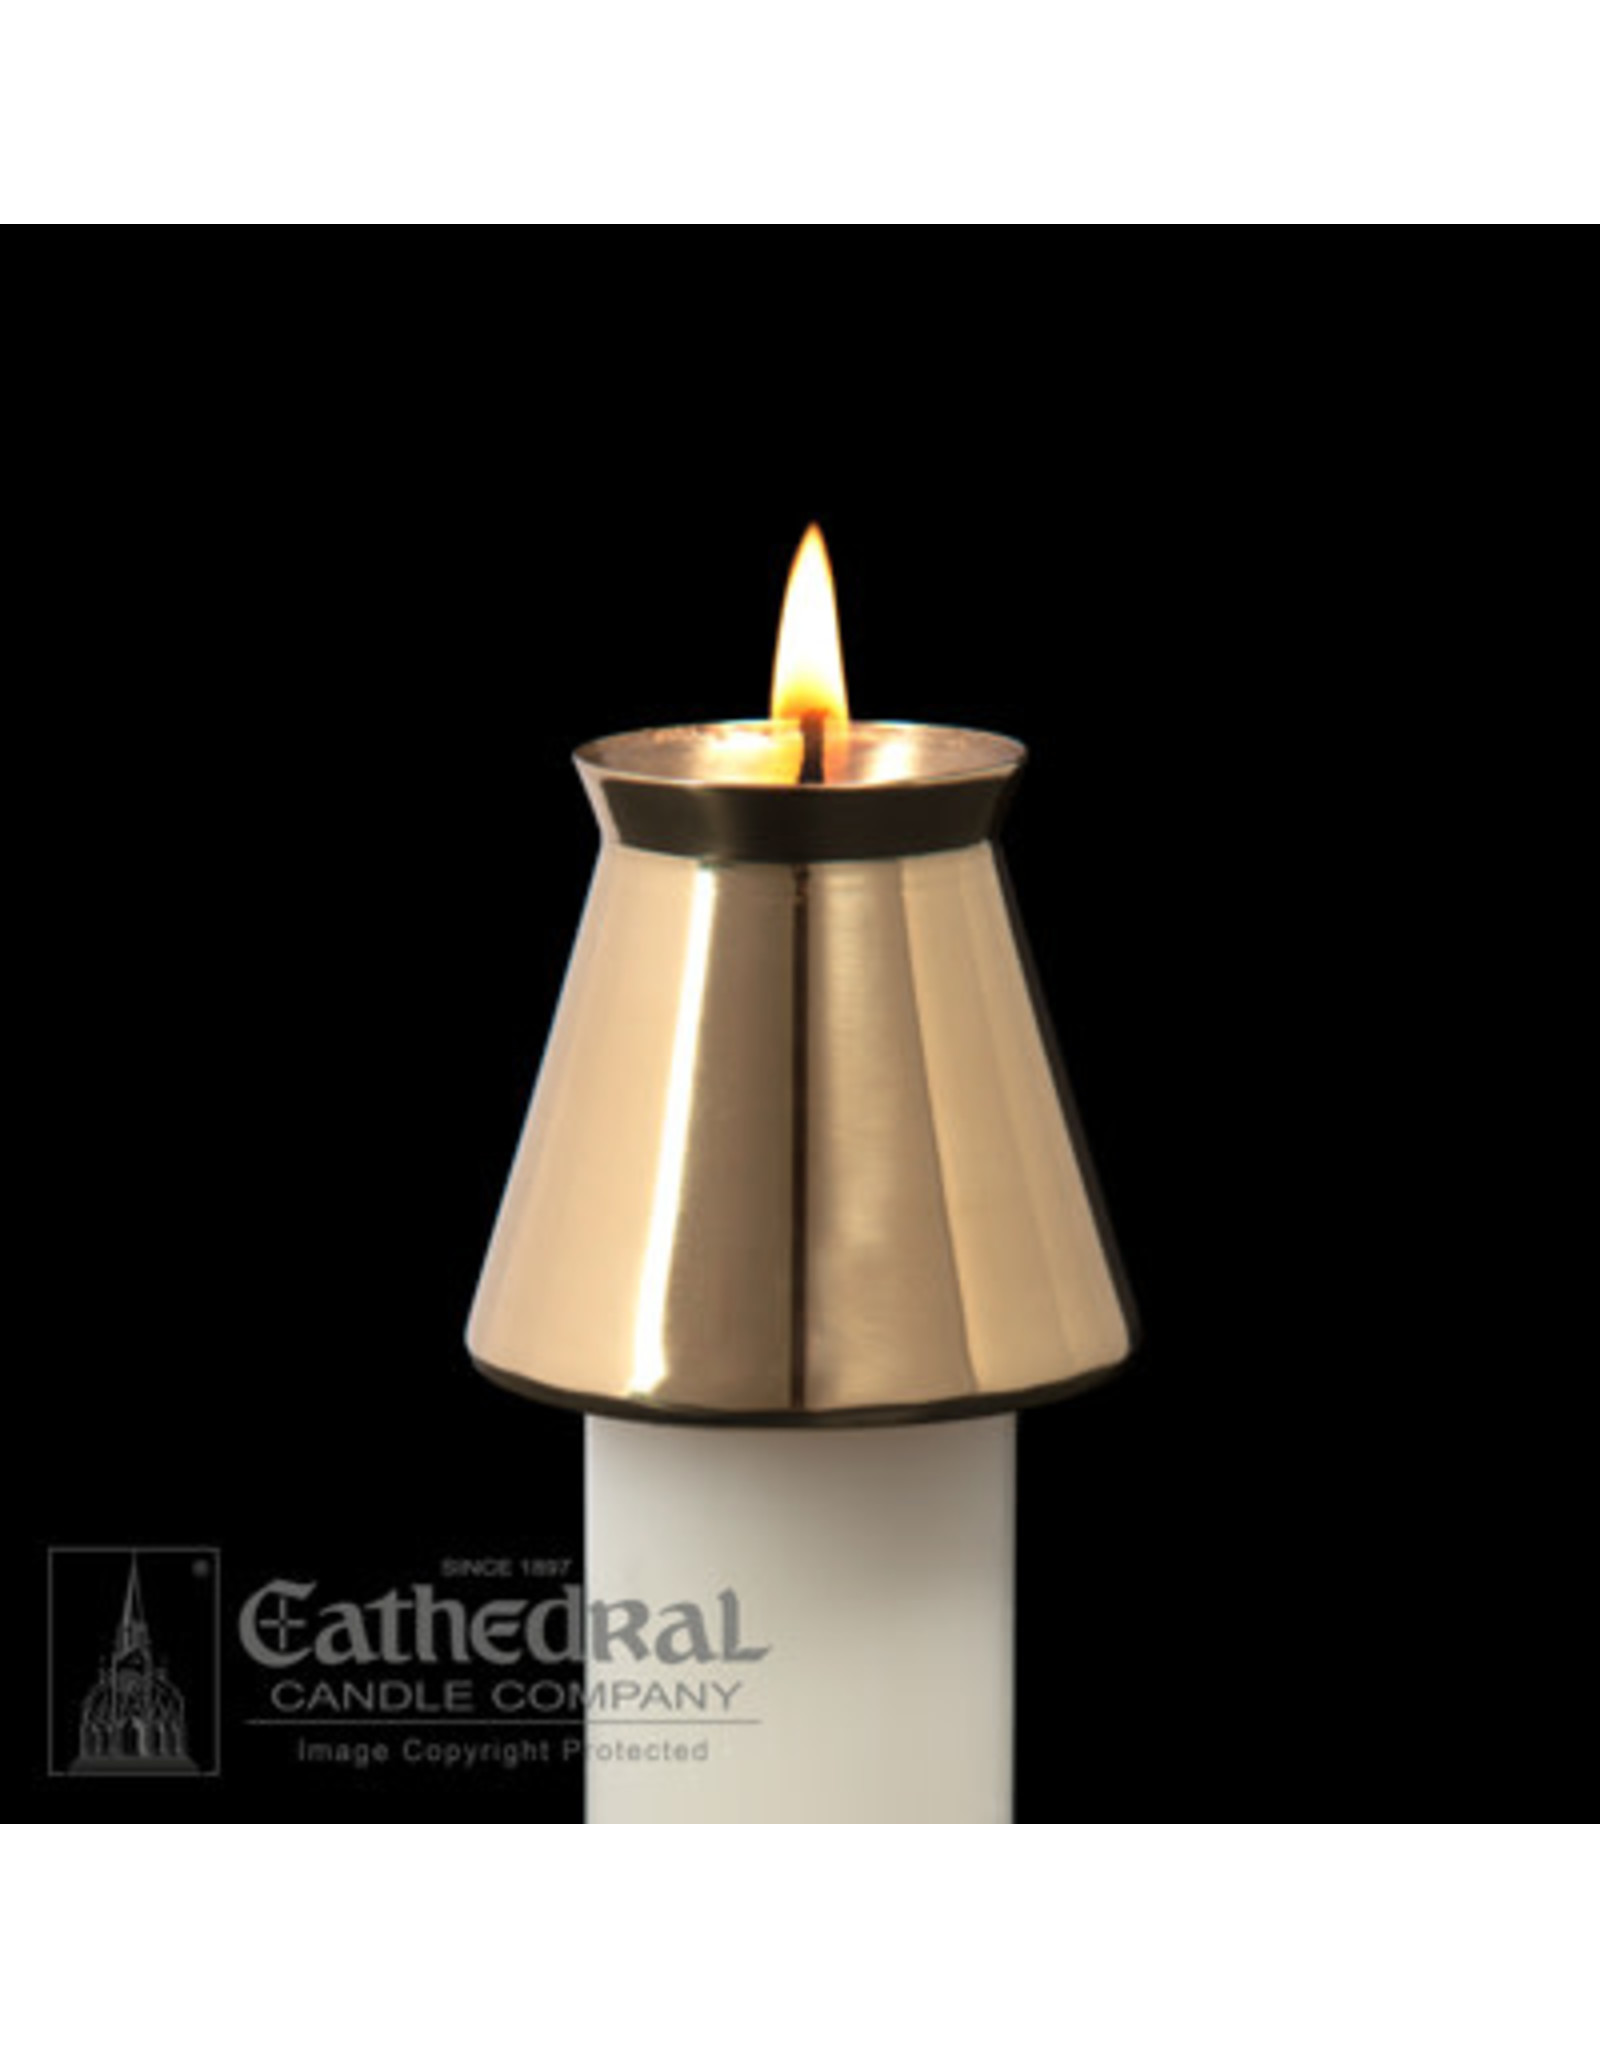 Cathedral Candle Candle Follower "New Style" Candle Diameter: